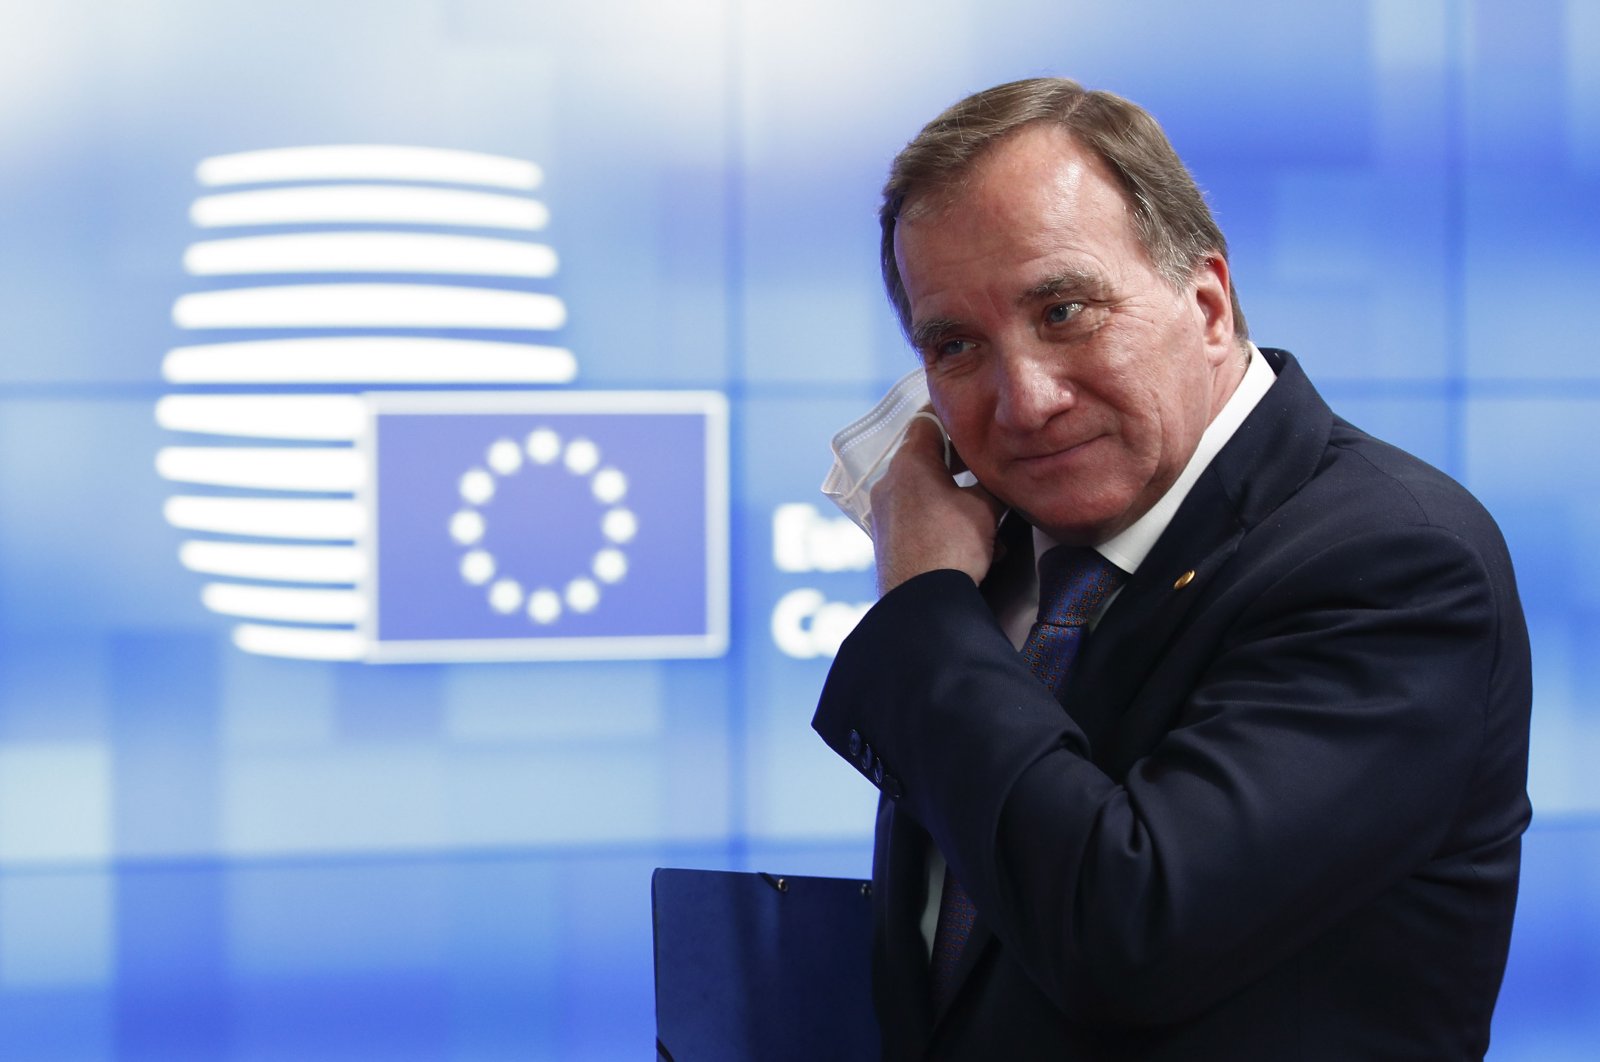 Sweden's Prime Minister Stefan Lofven departs after a face-to-face European Union leaders summit in Brussels, Belgium, Oct. 22, 2021. (EPA Photo)